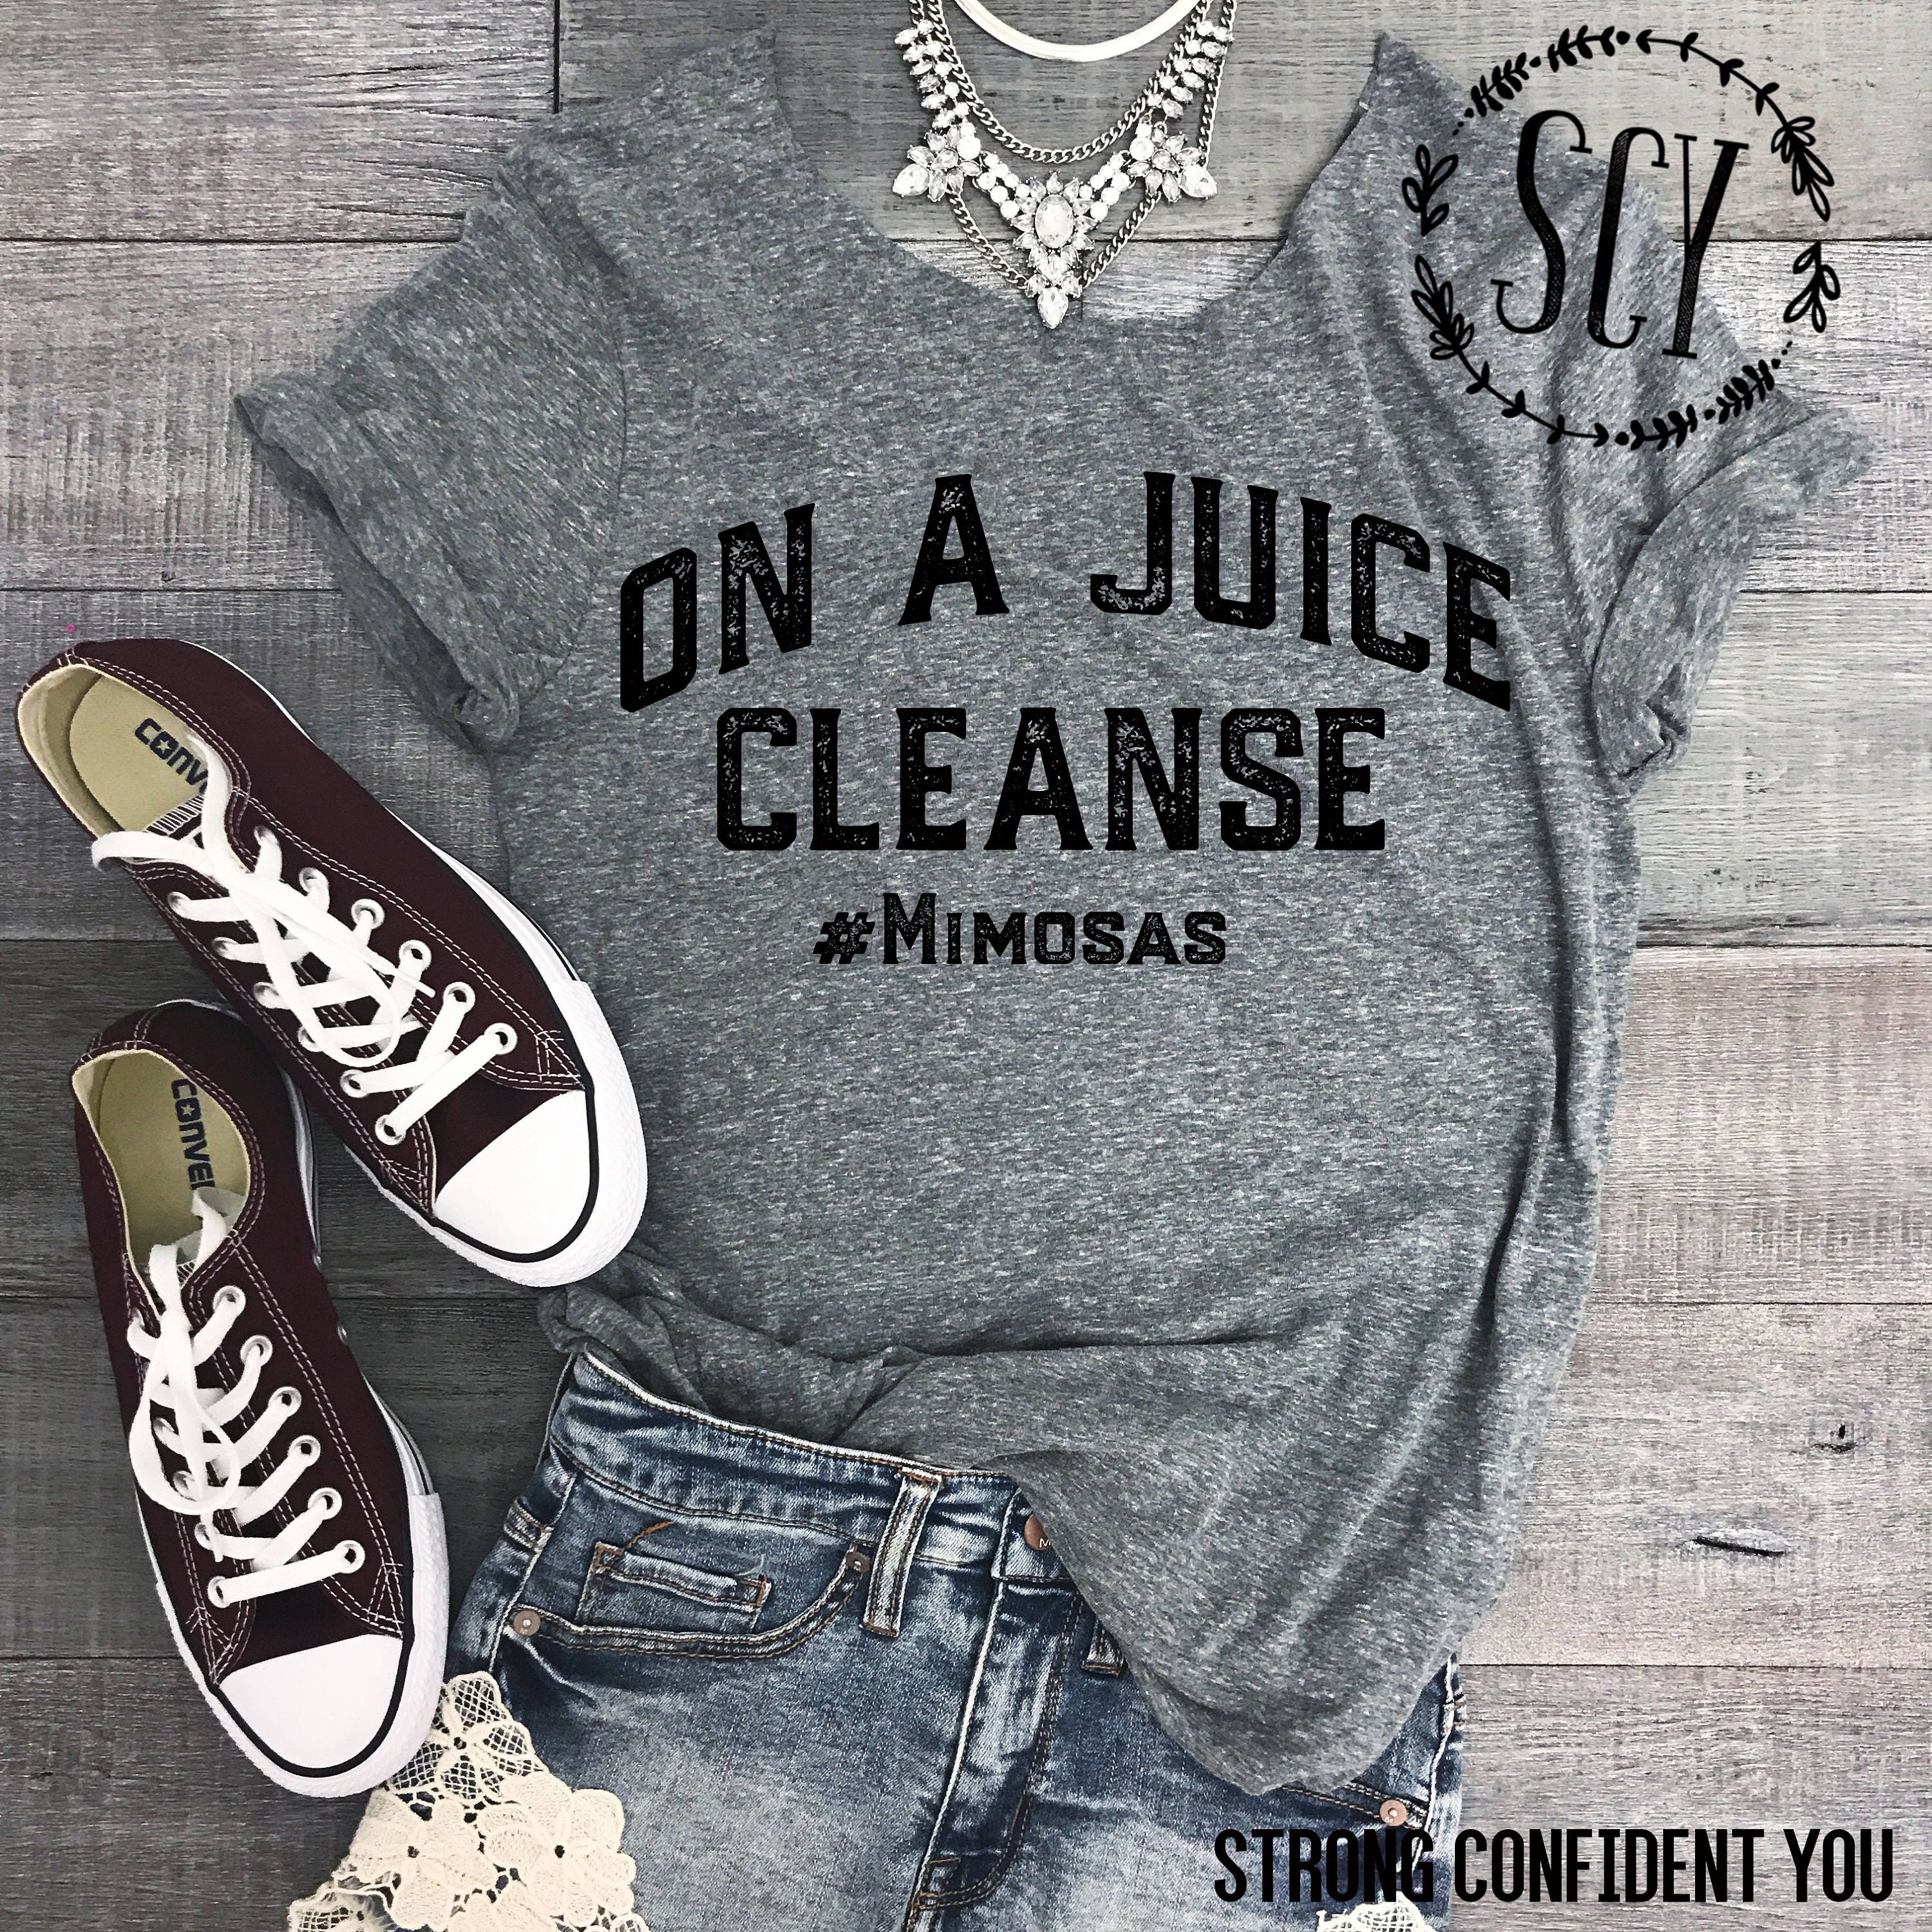 On A Juice Cleanse #Mimosas - Brunch Shirt - Raw Edge Triblend Tee - Off Shoulder Tee Shirt - Funny Graphic Tee - Yoga Tee